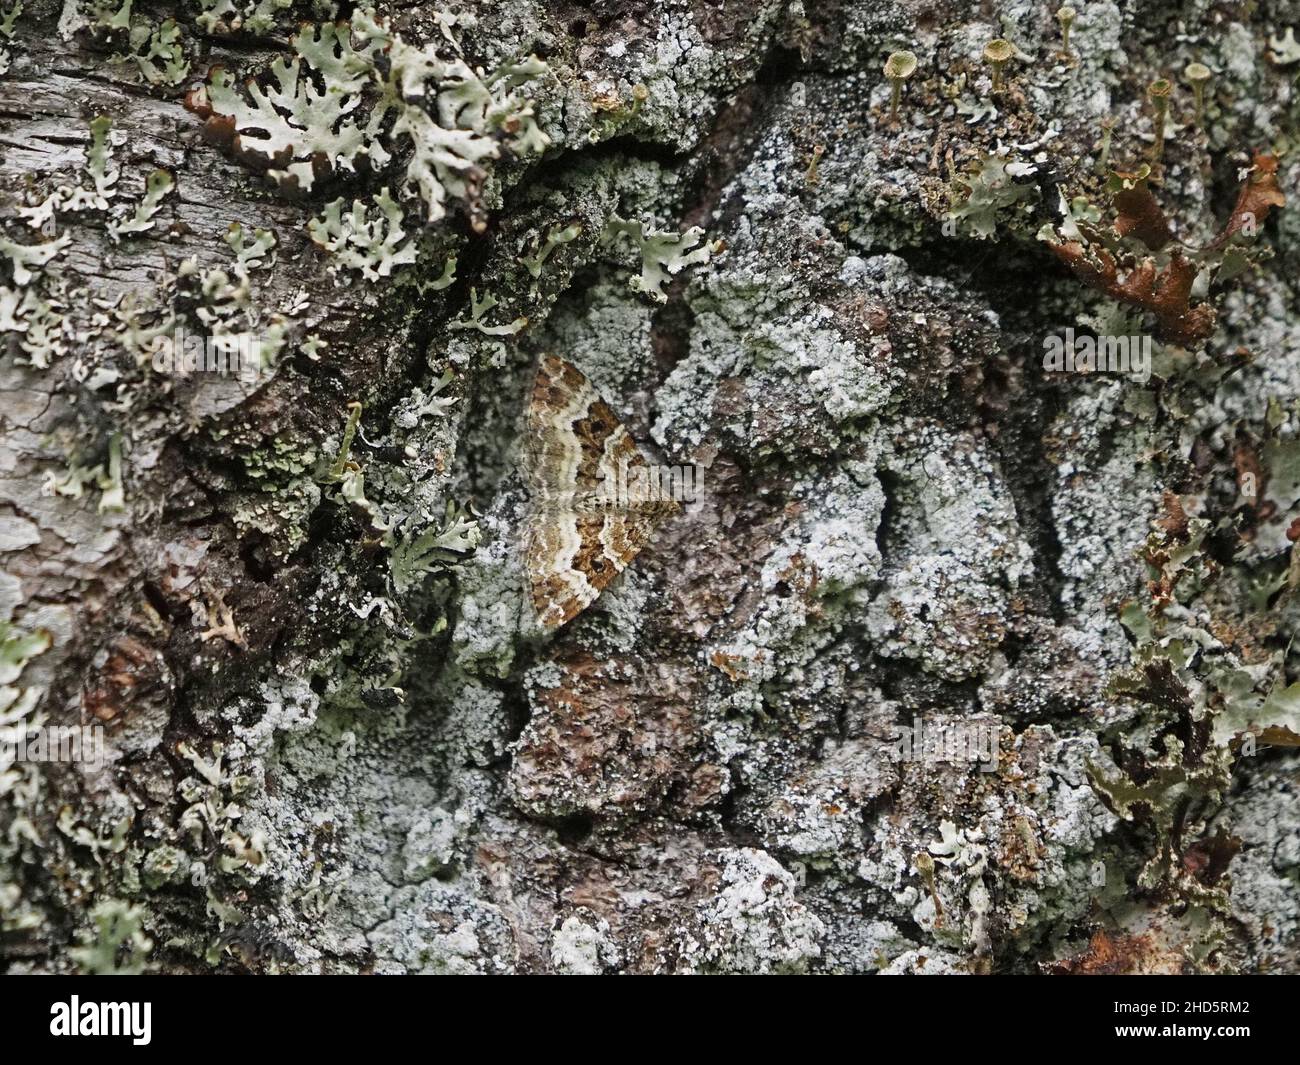 common carpet /white-banded toothed carpet (Epirrhoe alternata) a moth camouflaged on lichen-encrusted bark in damp woodland - Perthshire,Scotland,UK Stock Photo